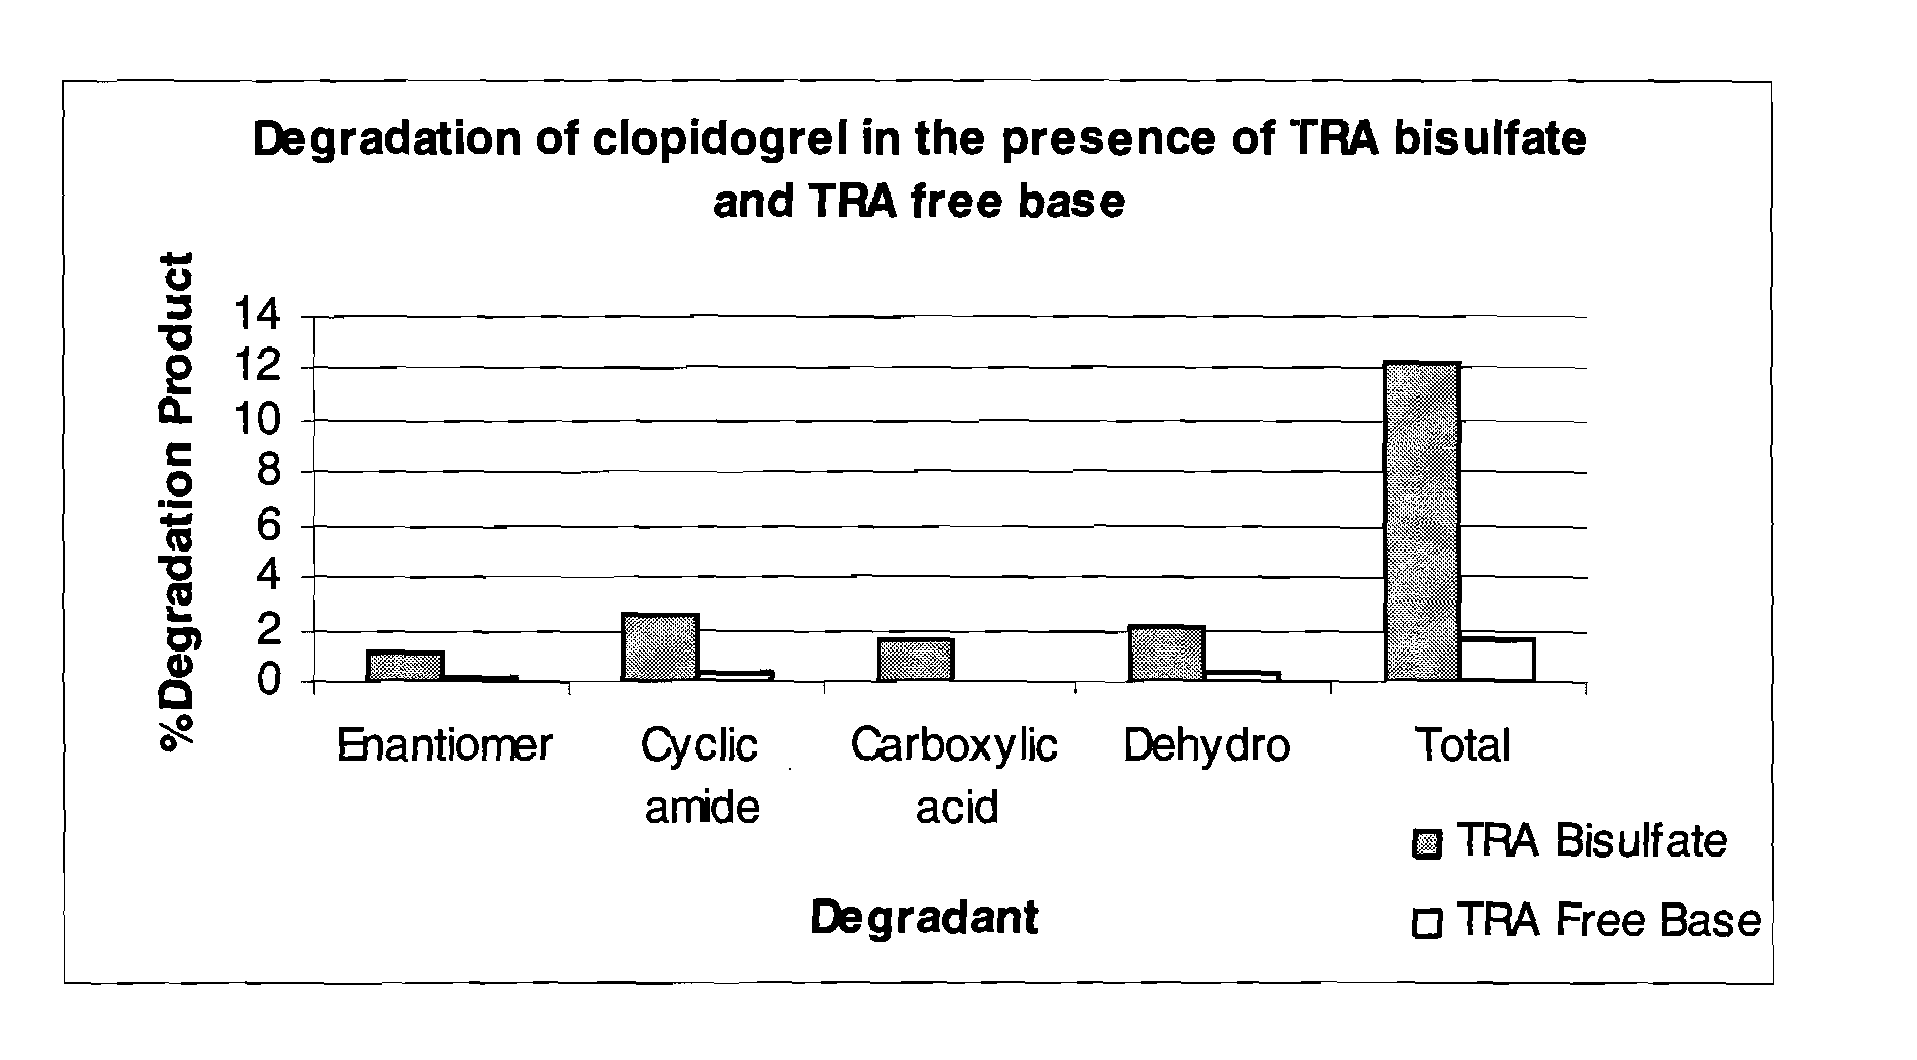 Thrombin receptor antagonist and clopidogrel fixed dose tablet